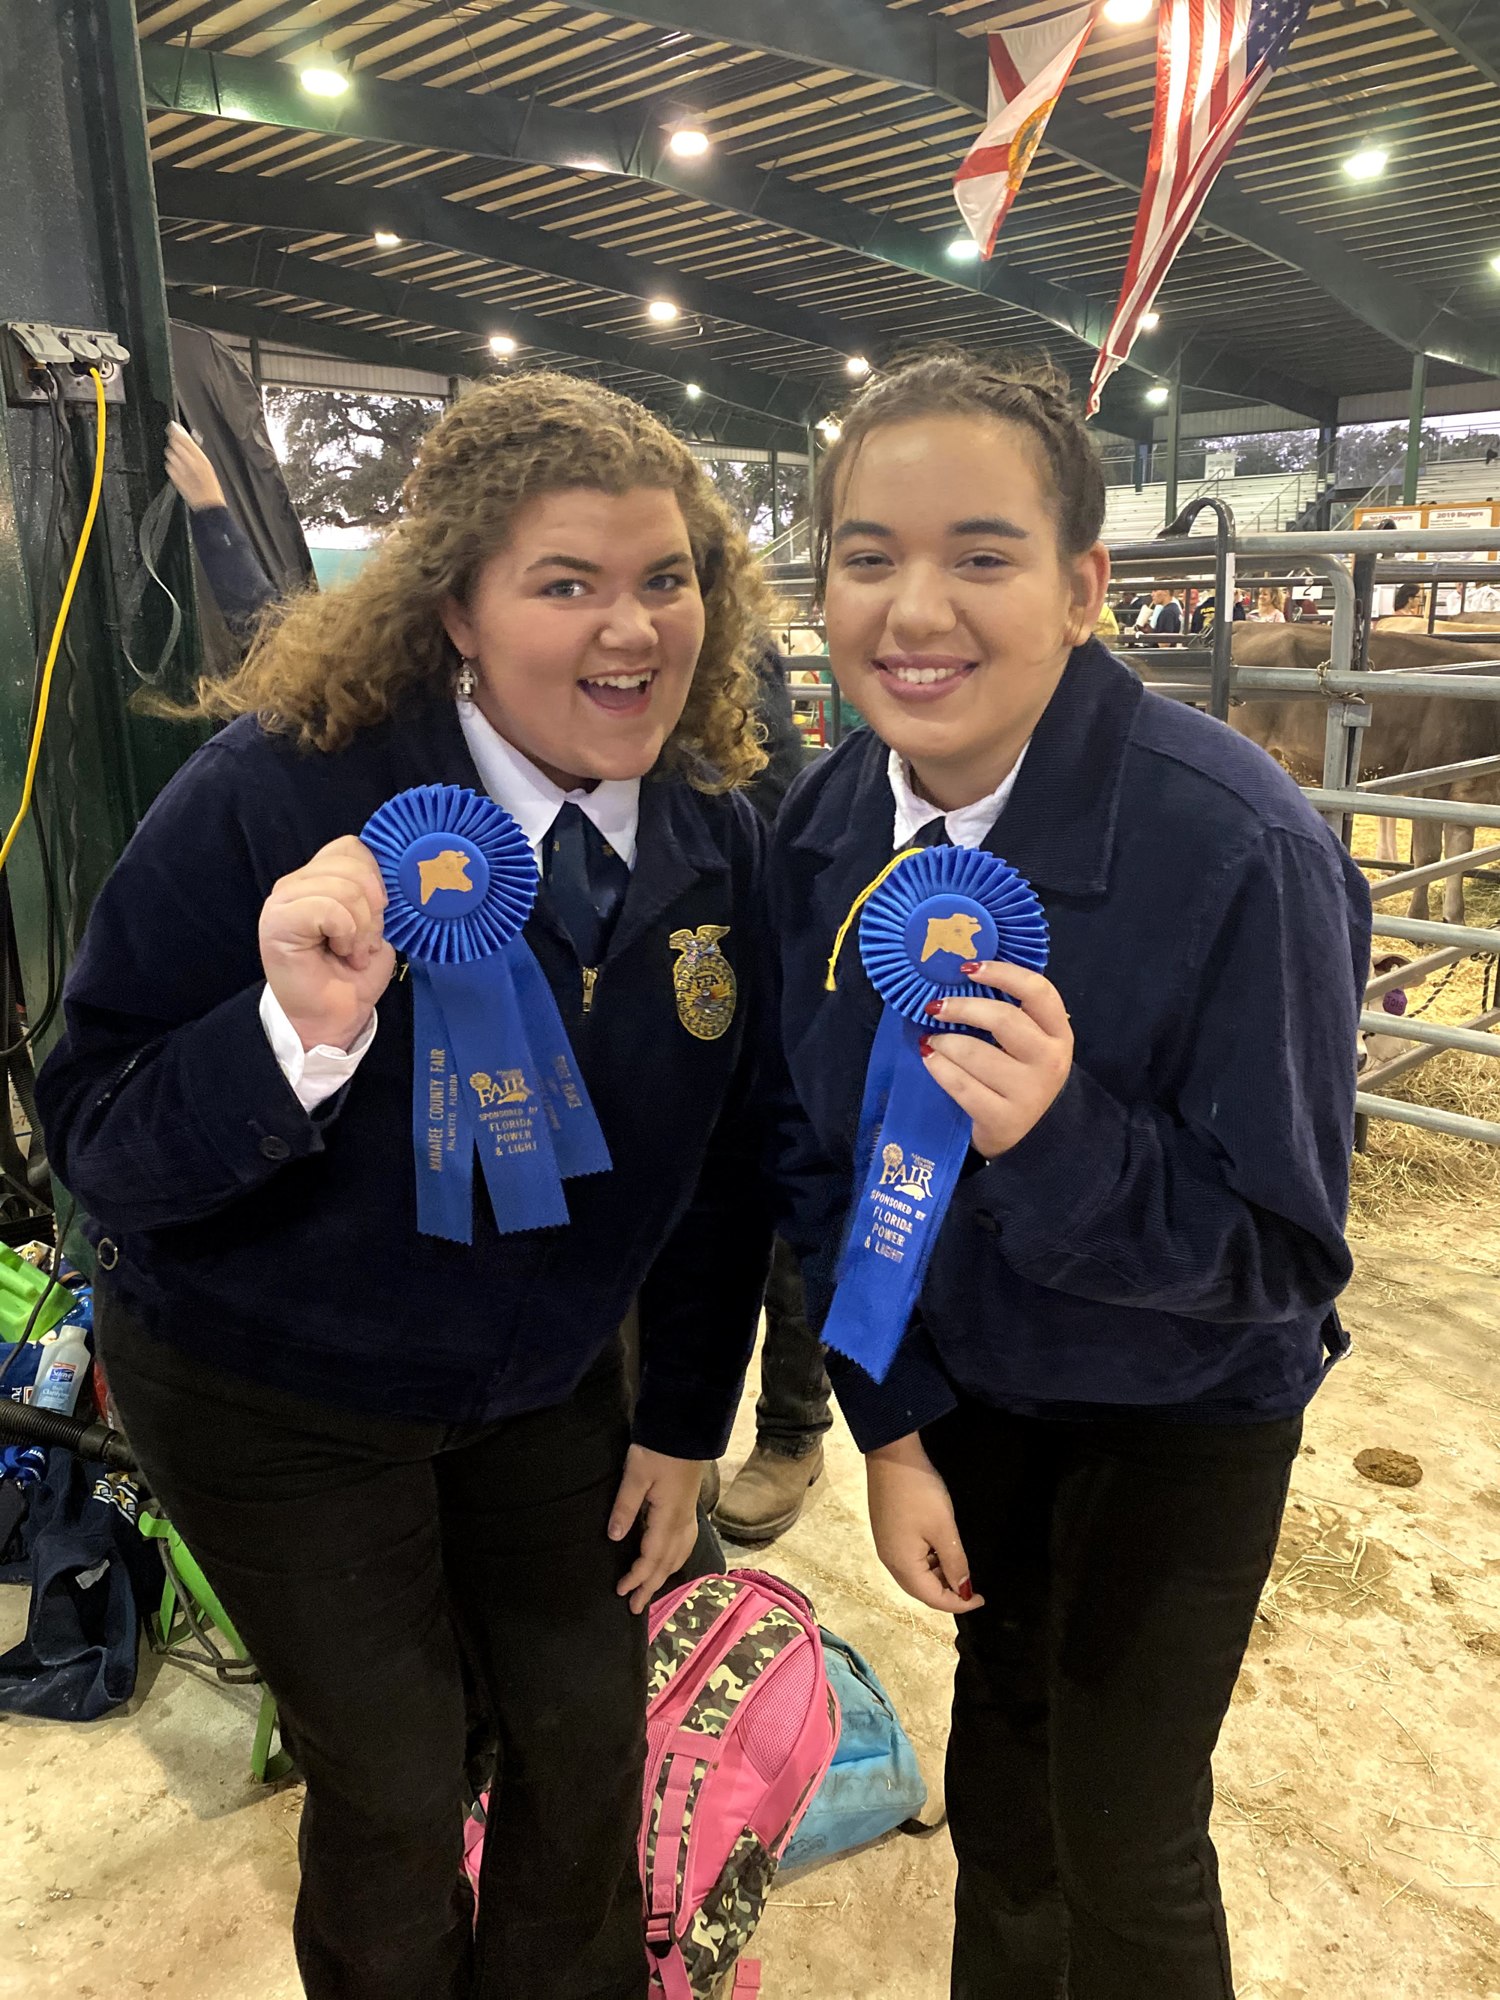 Lakewood Ranch High FFA members Madison Hartwig and Madeline Fields show off their ribbons. Hartwig wants to continue the success of the chapter while recruiting new members. Courtesy photo.